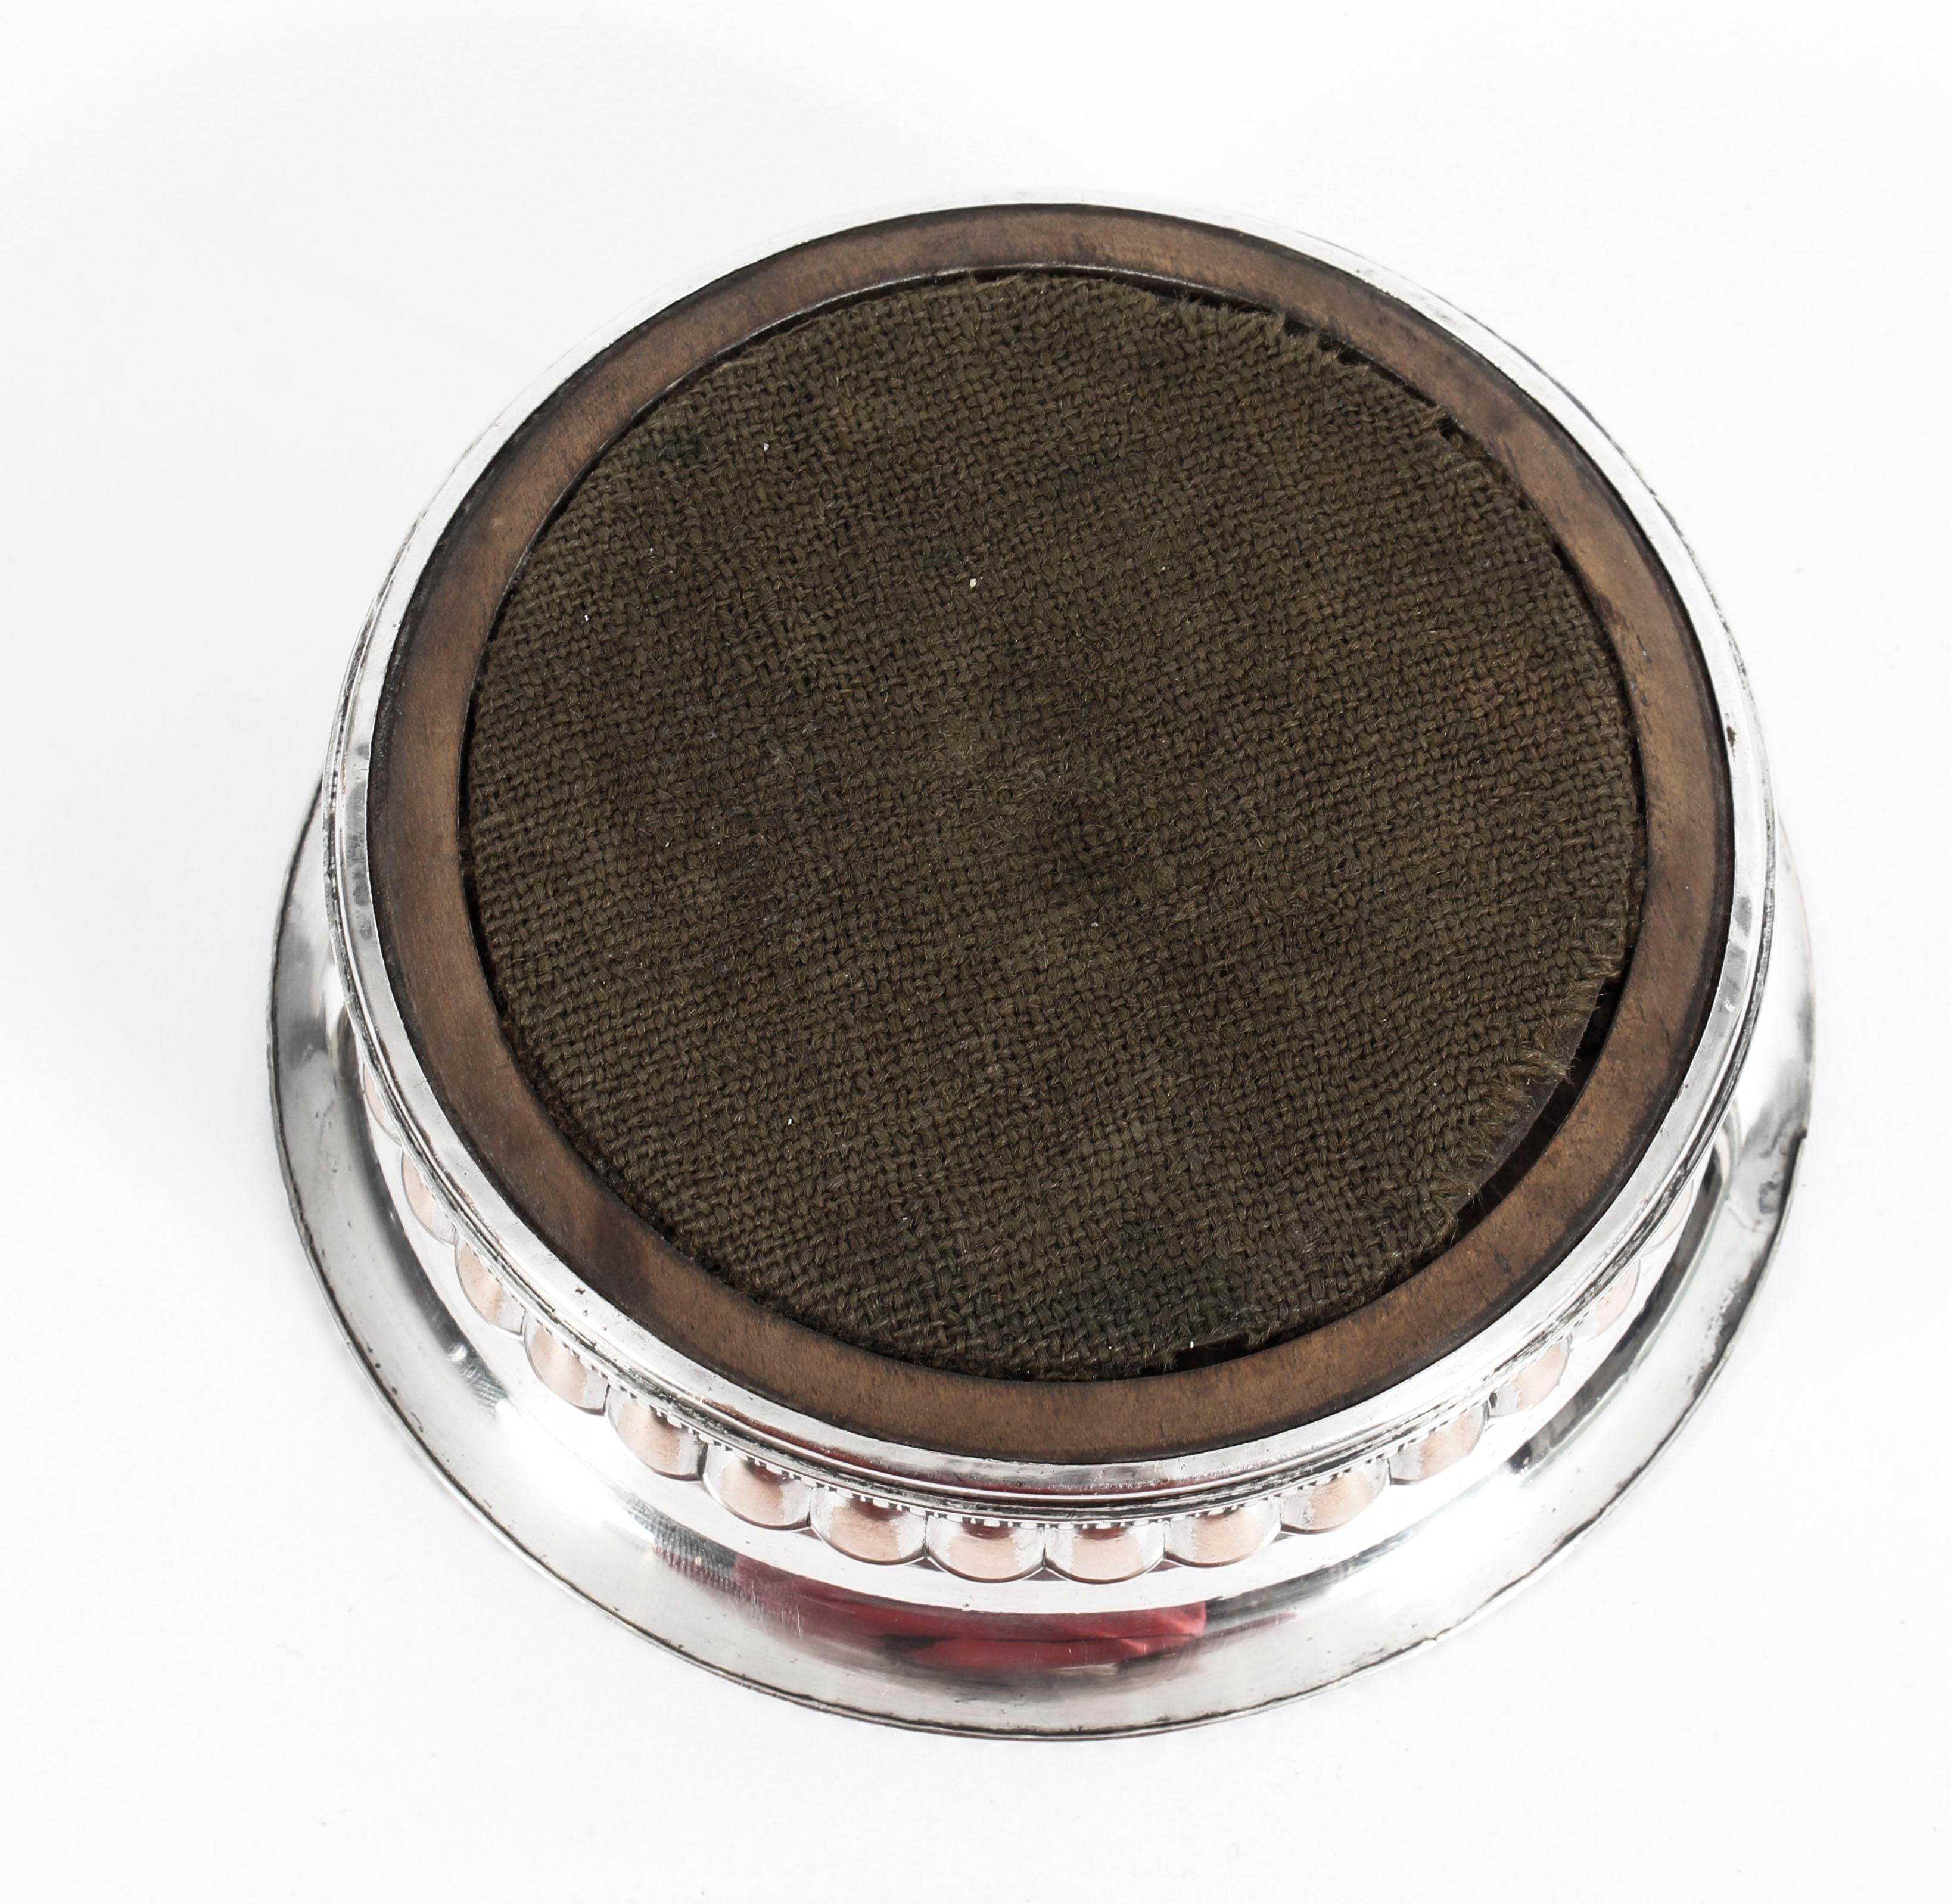 This is a very attractive pair of English antique old Sheffield silver on copper wine bottle coasters, circa 1820 in date.

These beautiful wine coasters have inset hand-turned mahogany bases and feature exquisite gadrooned decoration to the